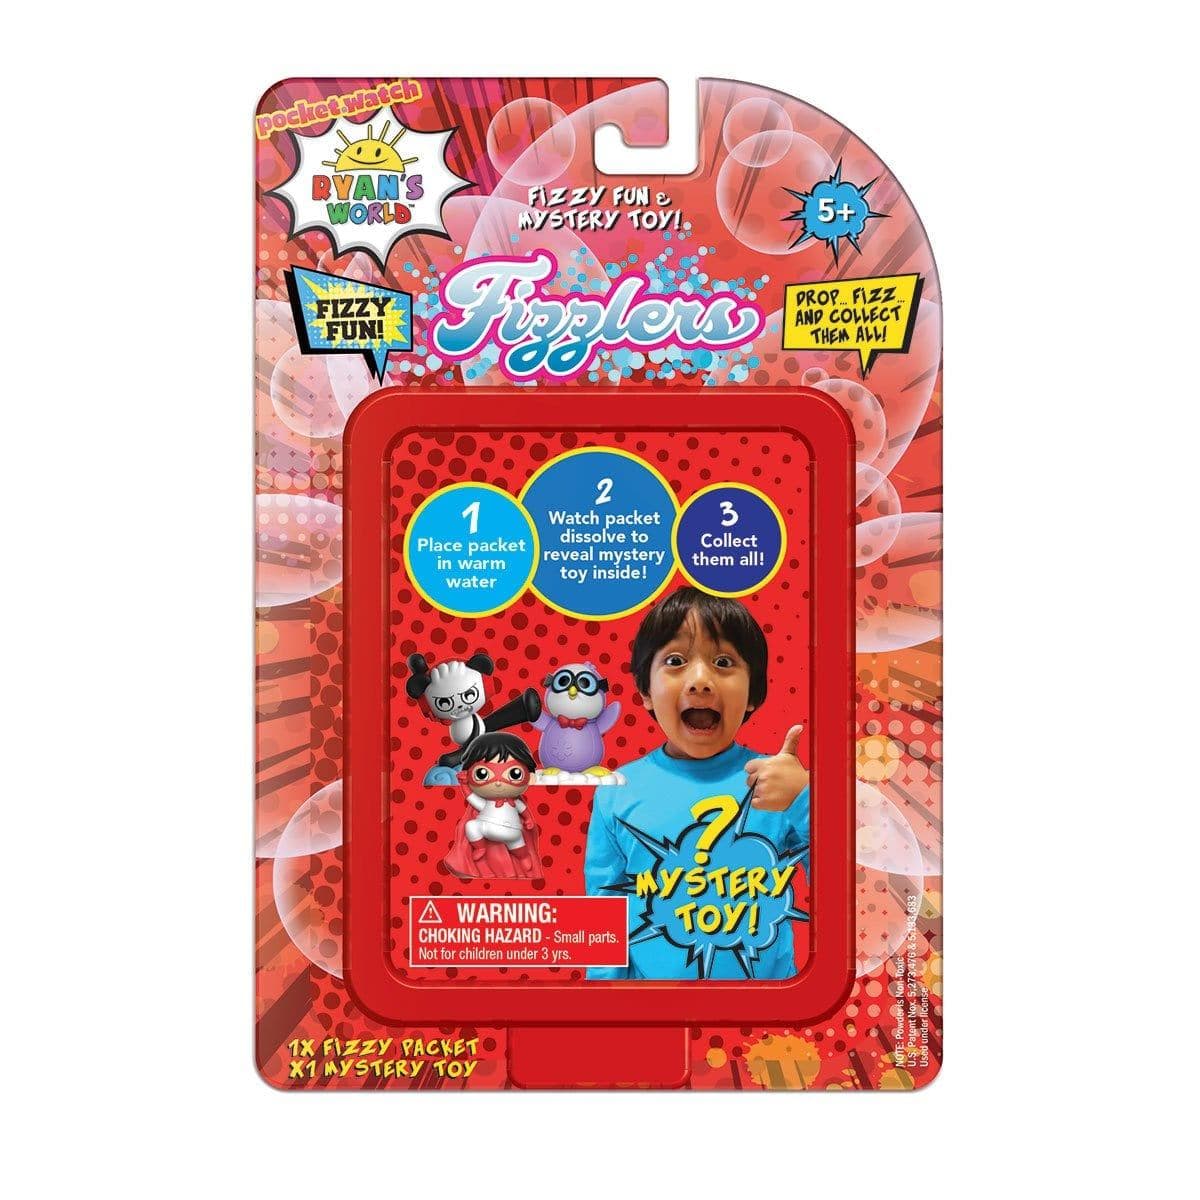 Buy Kids Birthday Ryan's World fizzlers mystery toy - Assortment sold at Party Expert